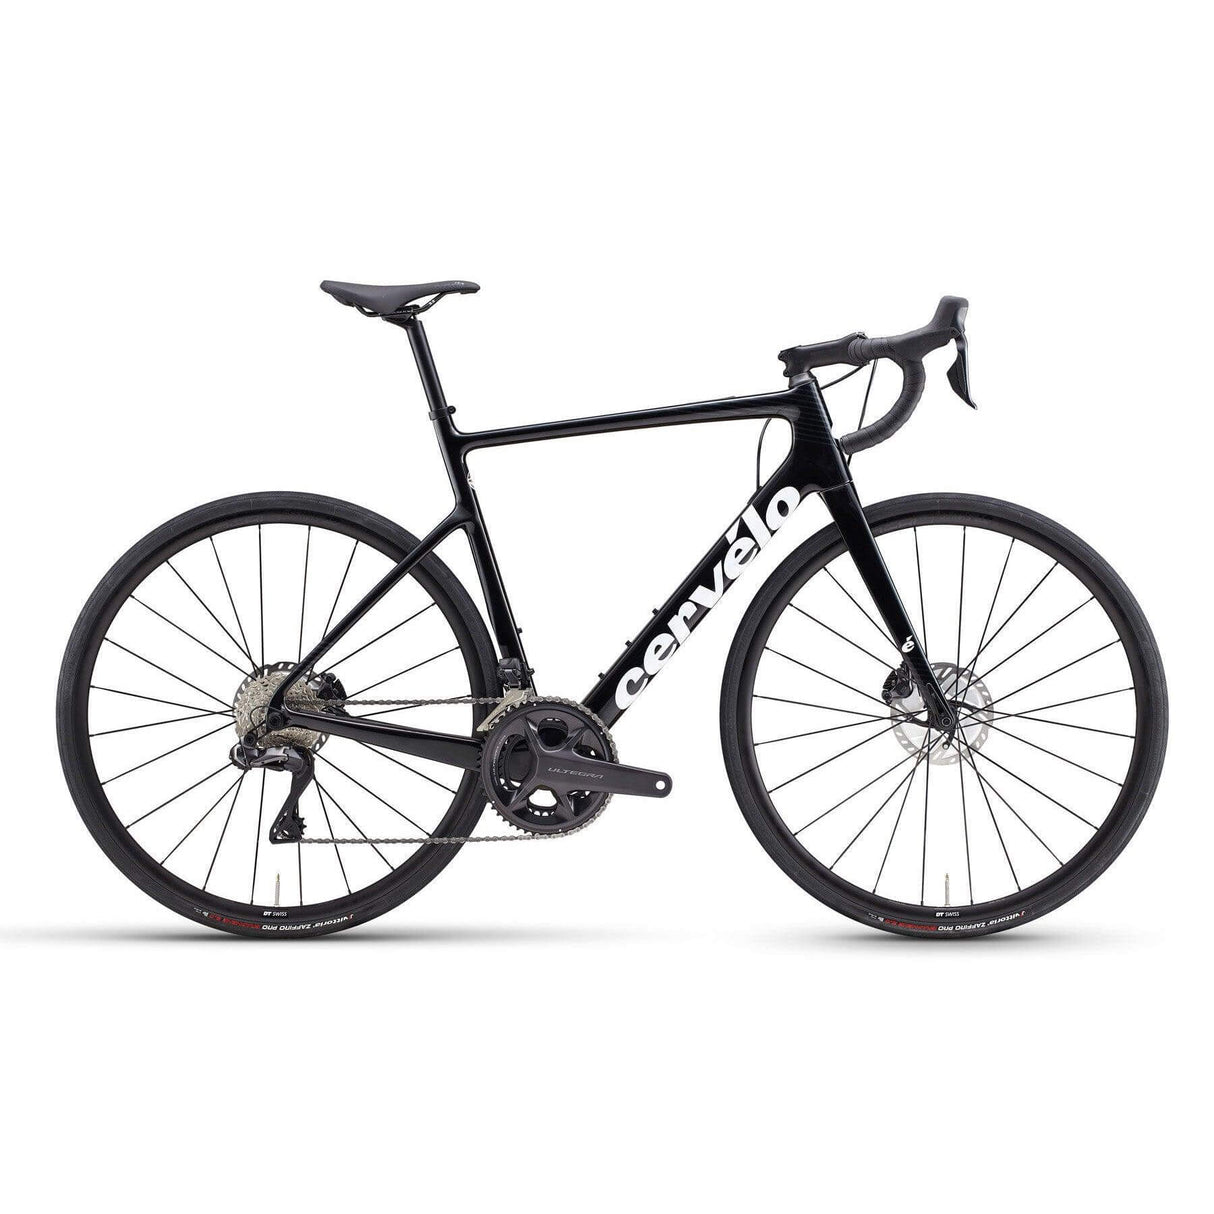 Cervelo Caledonia Ultegra Di2 | Strictly Bicycles